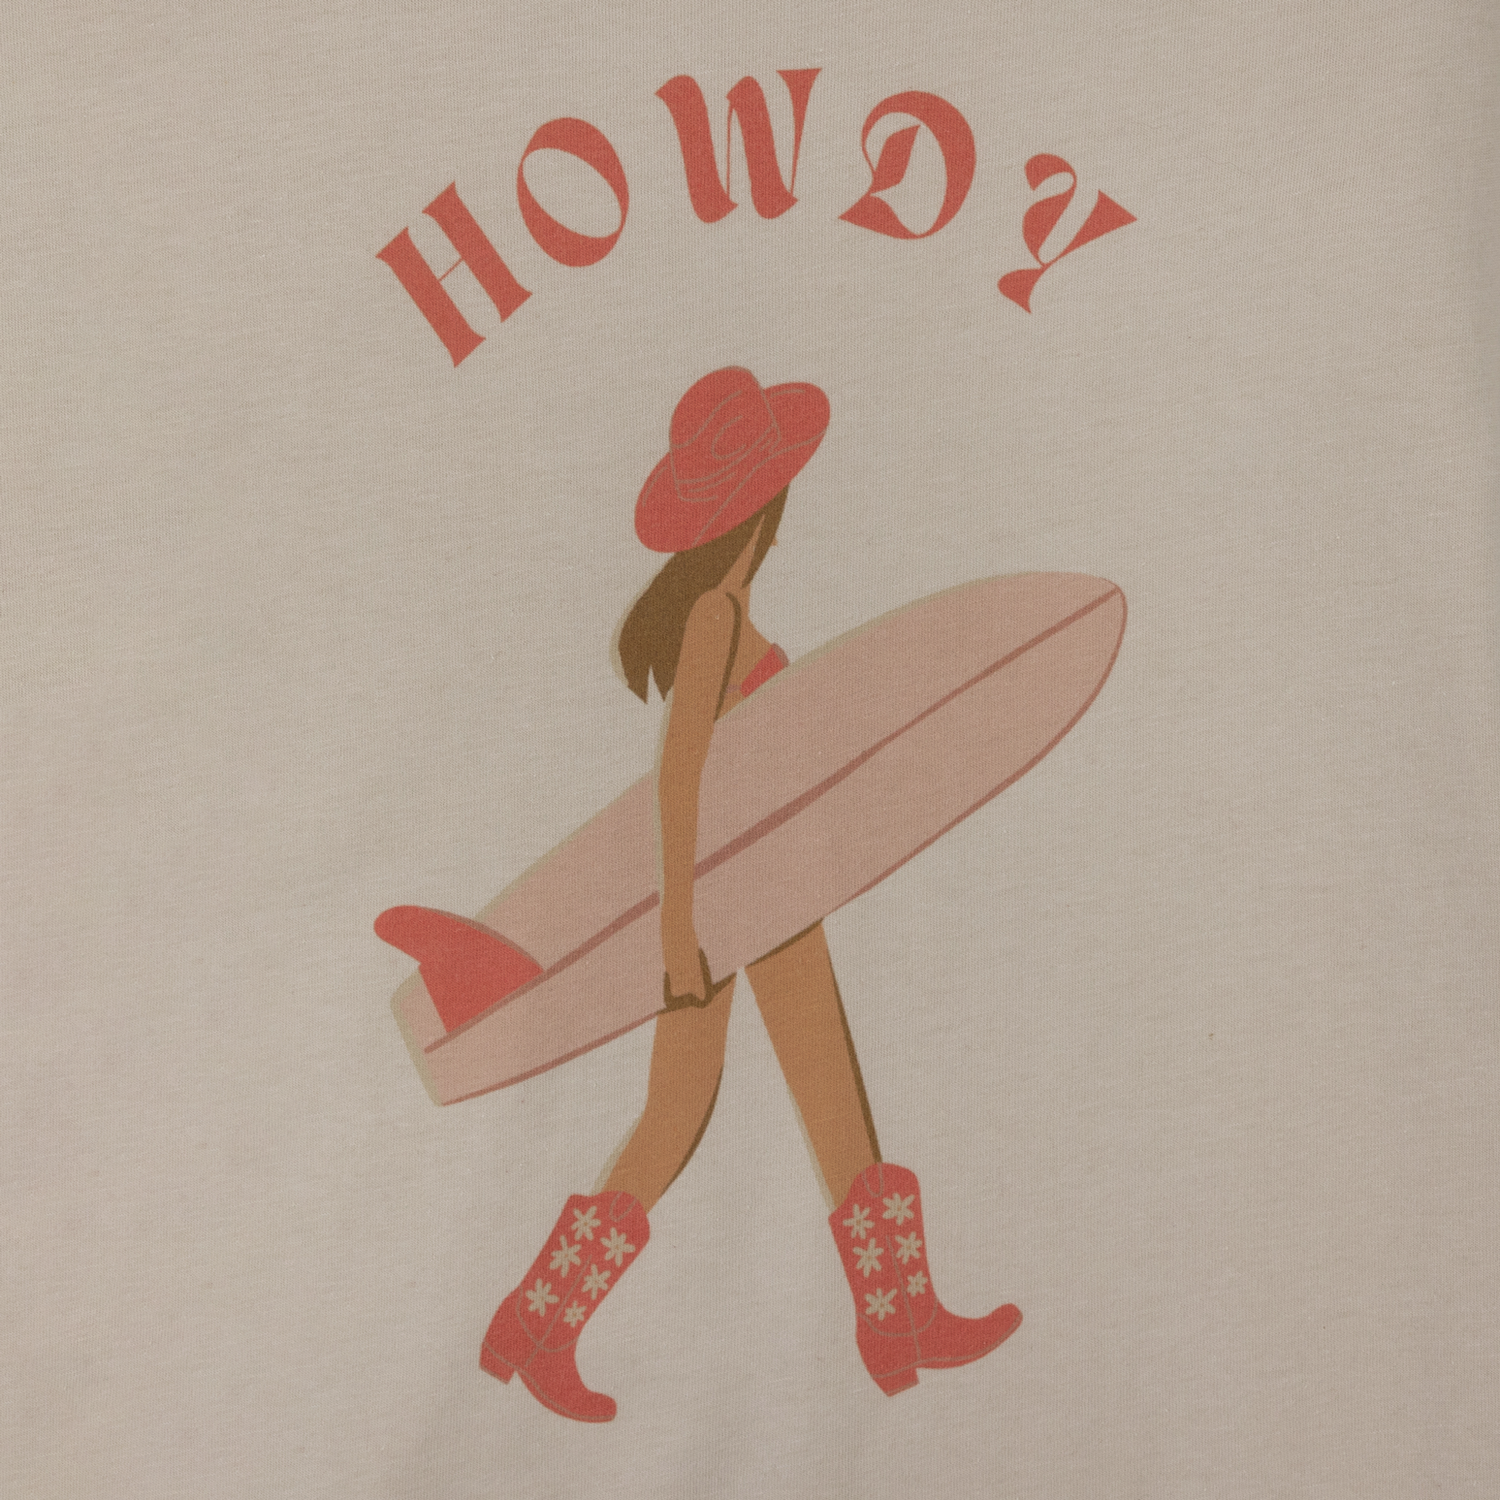 Howdy Surfing Cowgirl T-Shirt